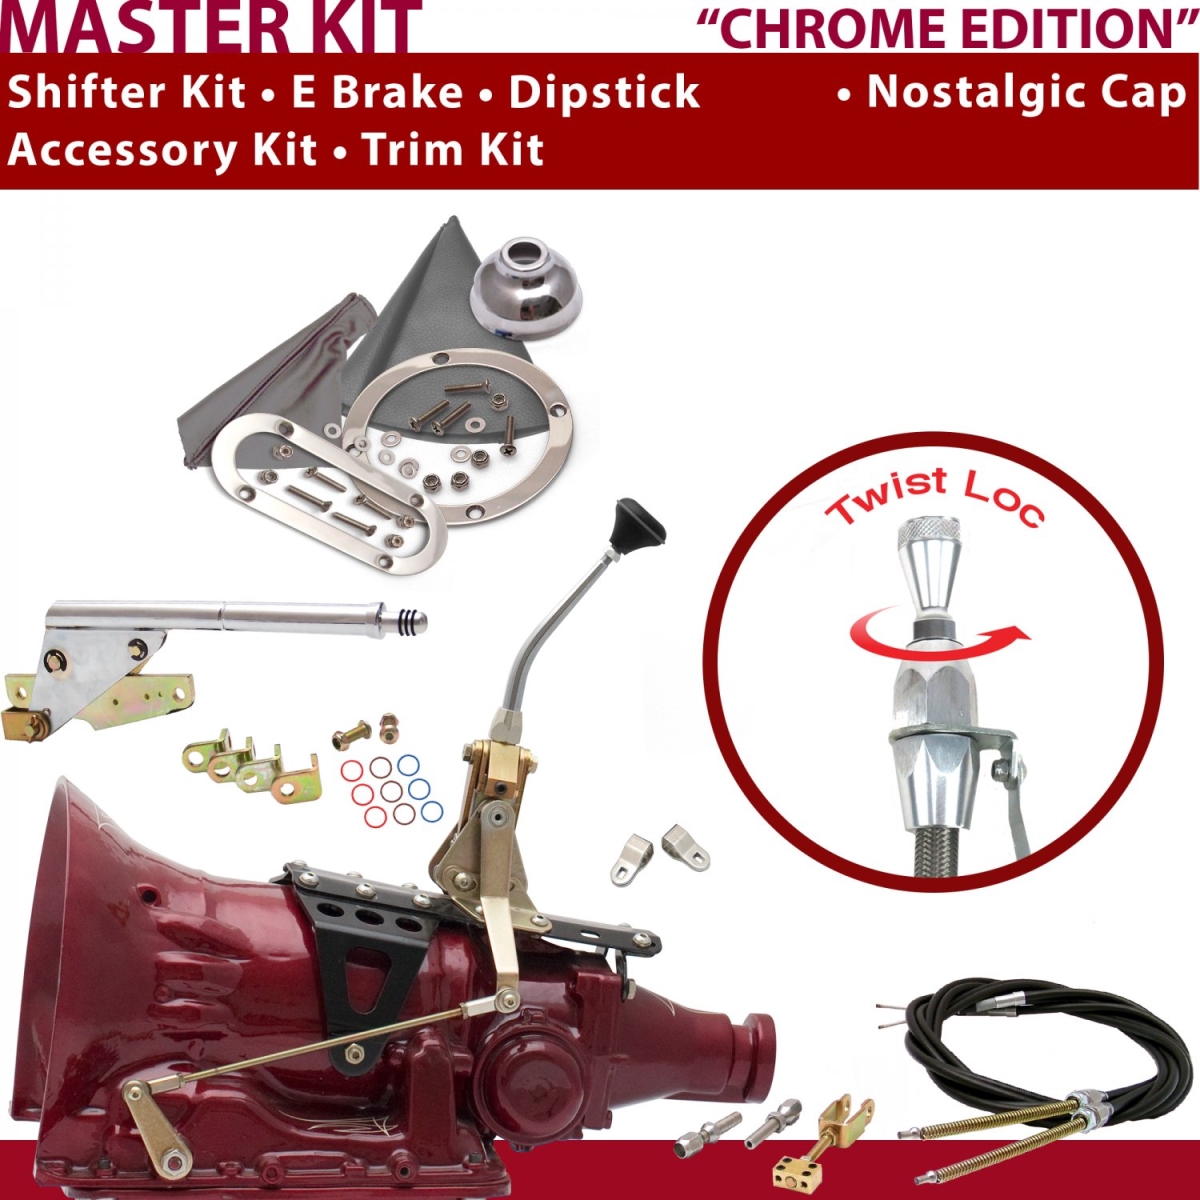 American Shifter 397660 C4 Shifter Kit 8 in. E Brake Cable Clevis Trim Kit Dipstick for D55FA -  American Shifter Company